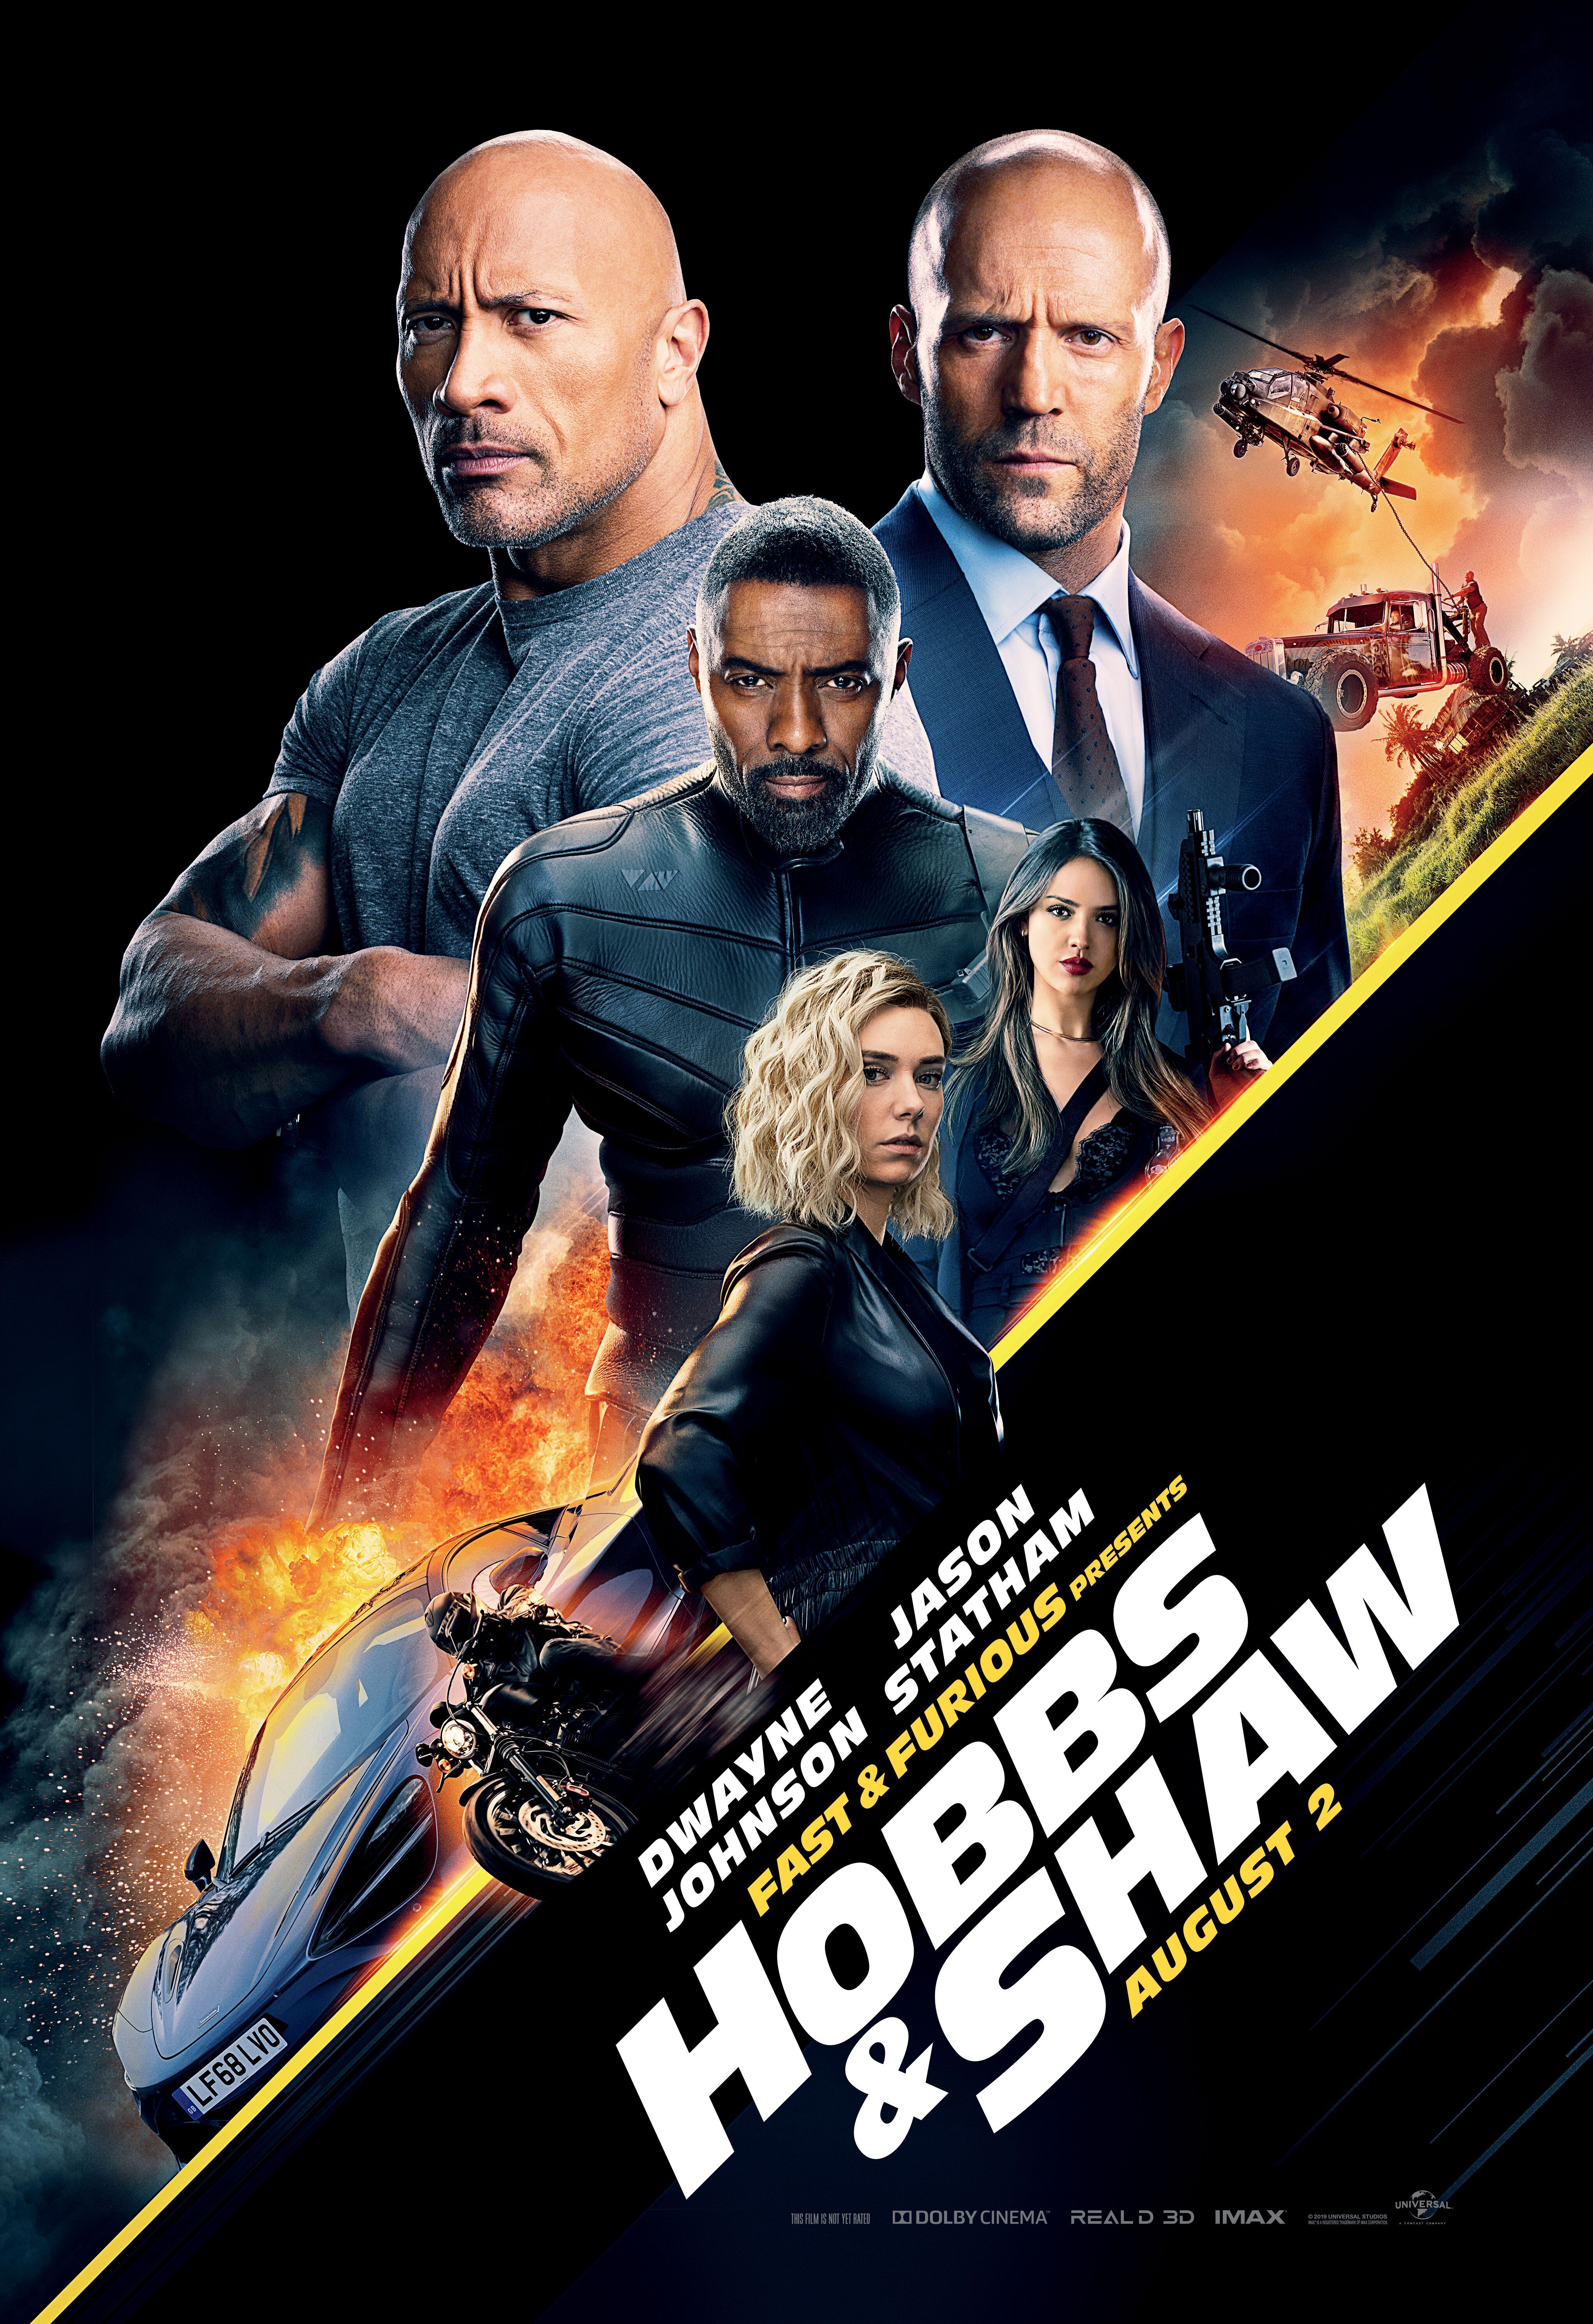 Fast and Furious Presents Hobbs & Shaw Film Poster